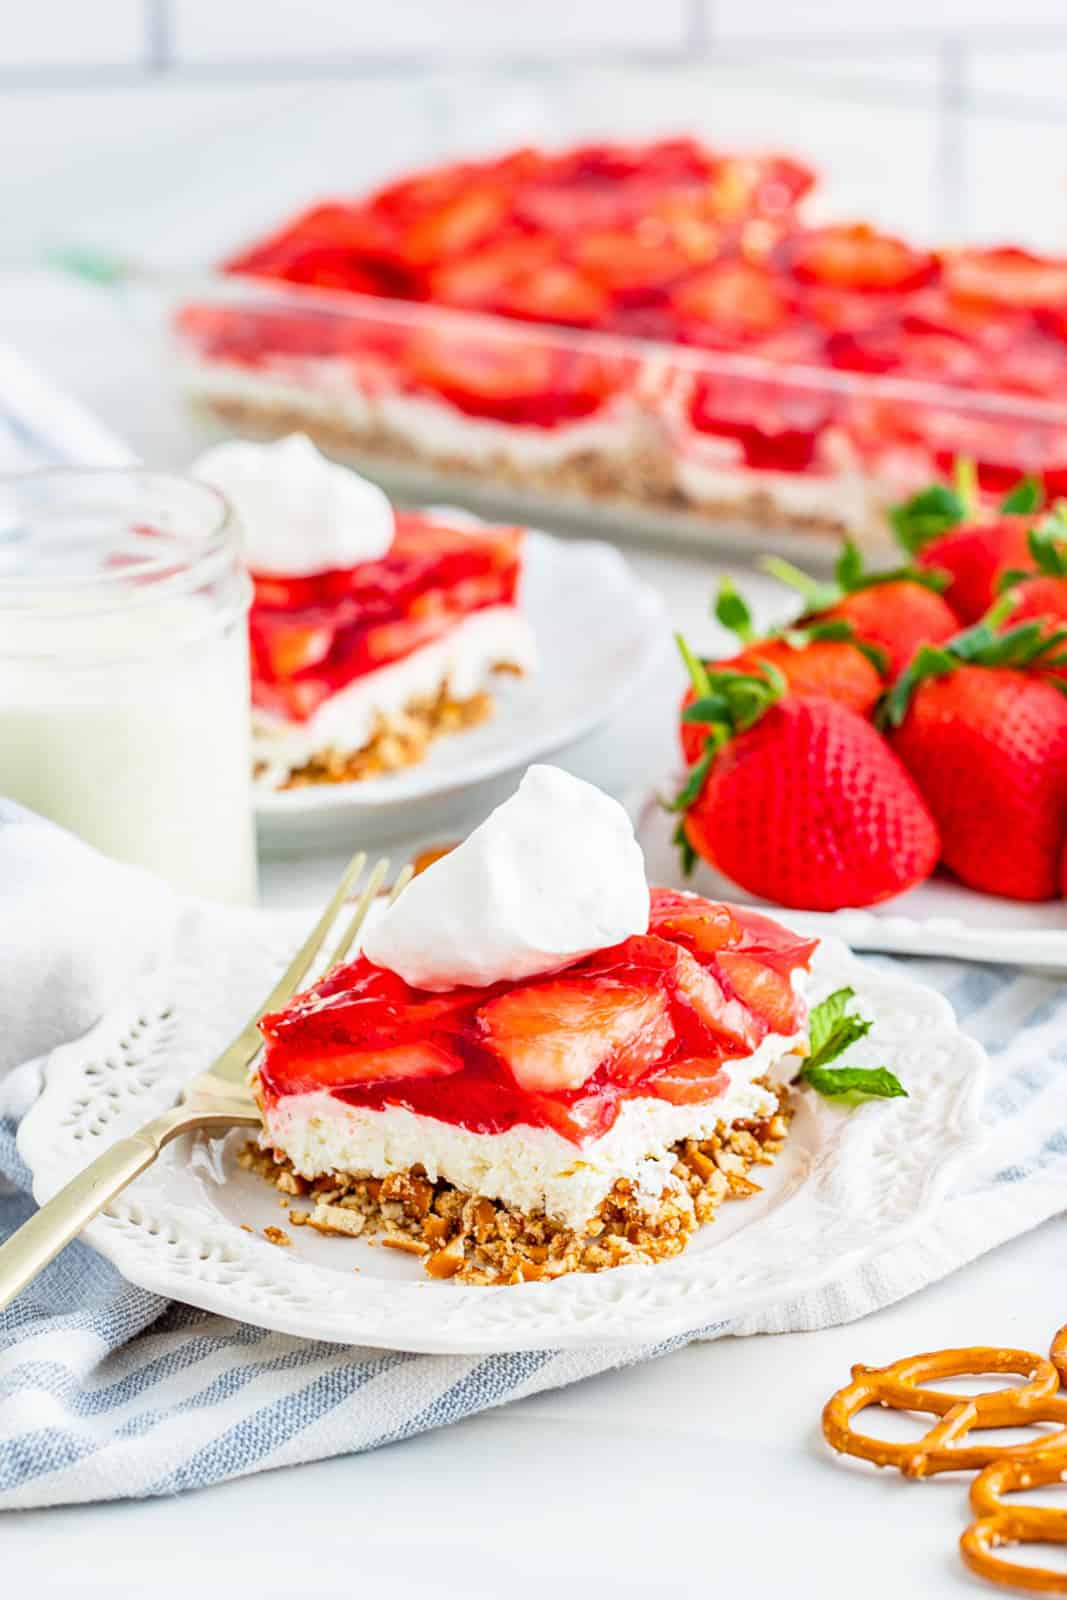 Slice of Strawberry Pretzel Salad on white plate with milk and strawberries beside it.